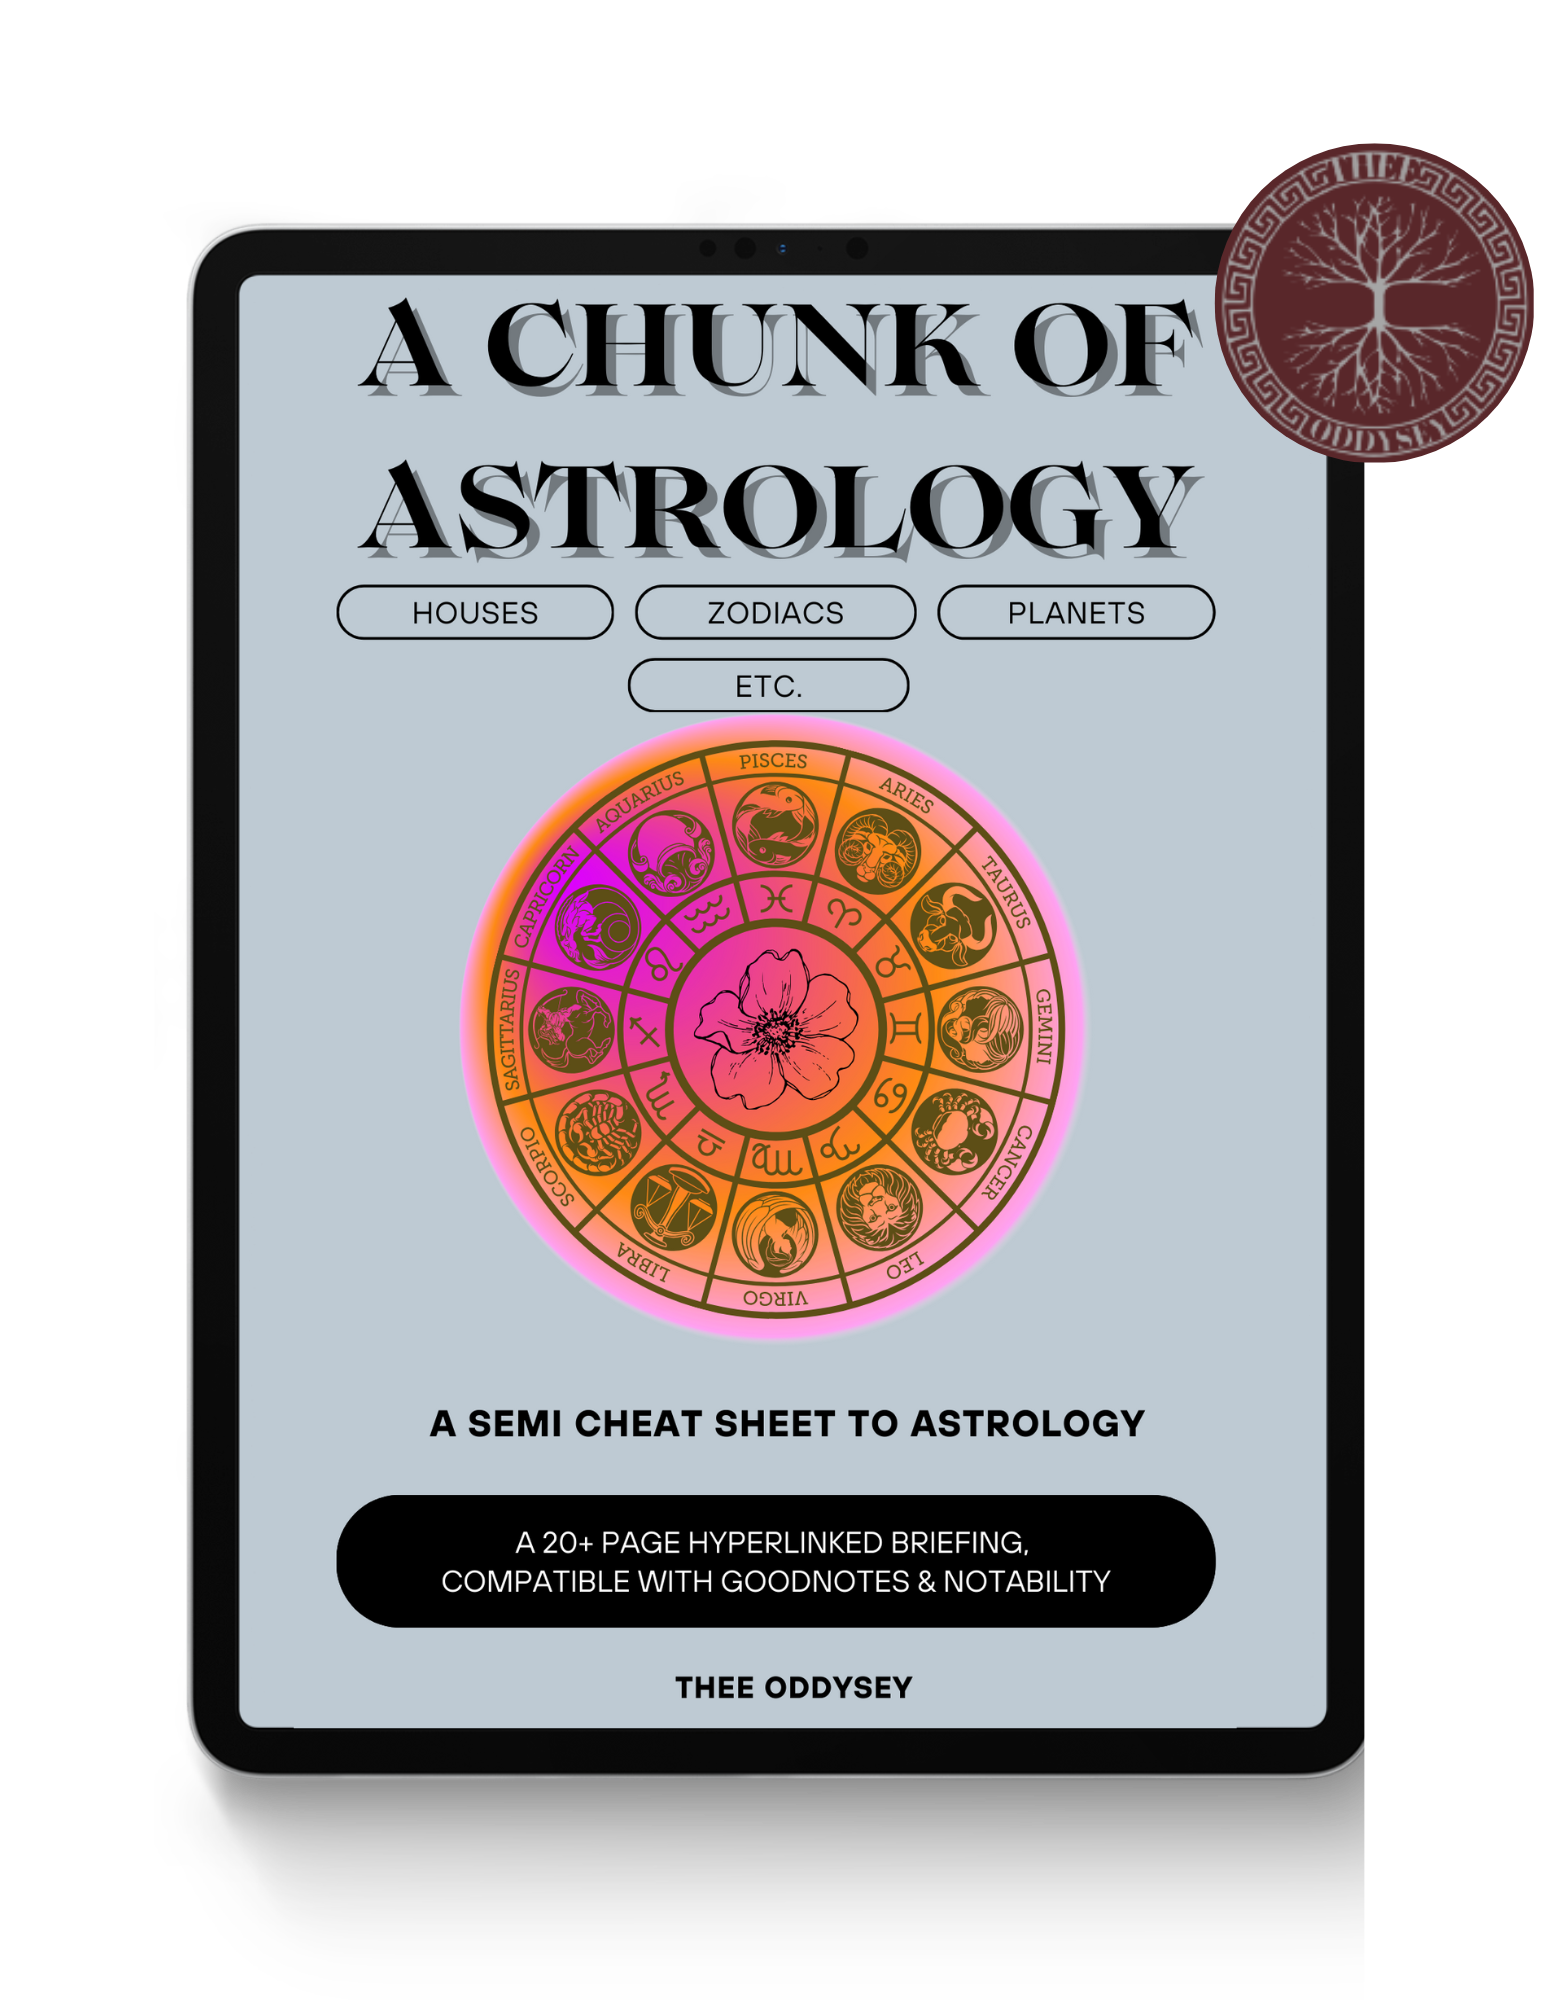 A Chunk of Astrology